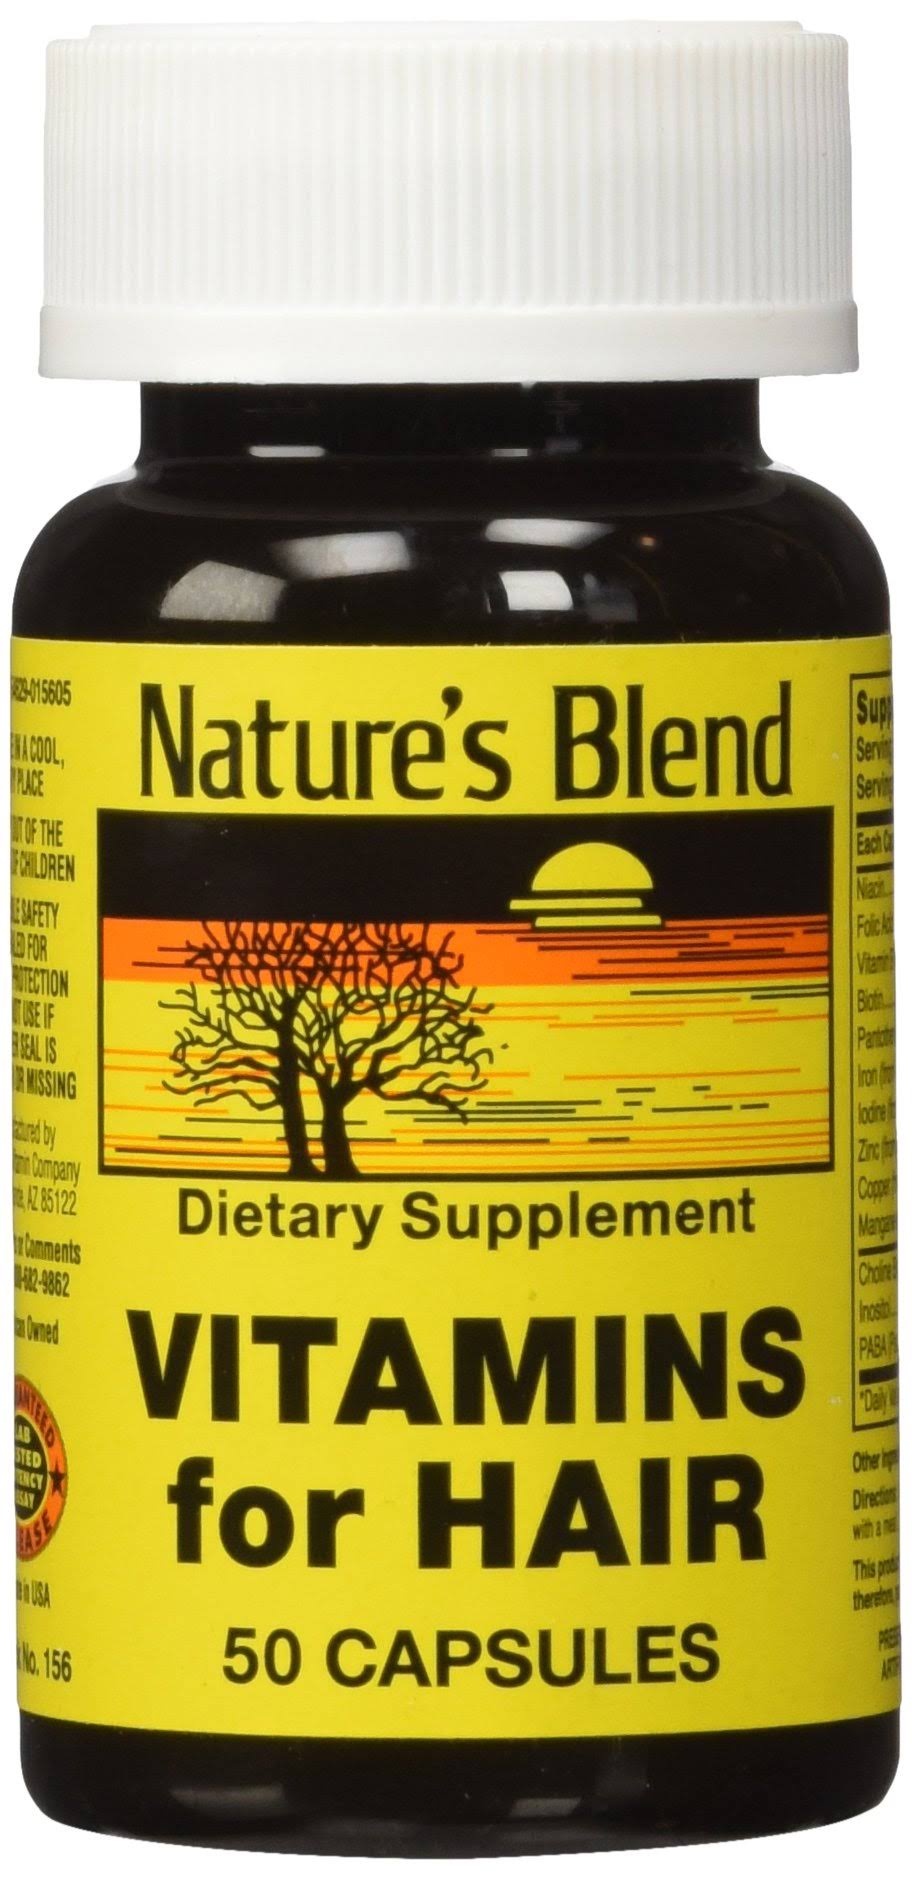 Nature's Blend Vitamins For Hair - 50 Capsules